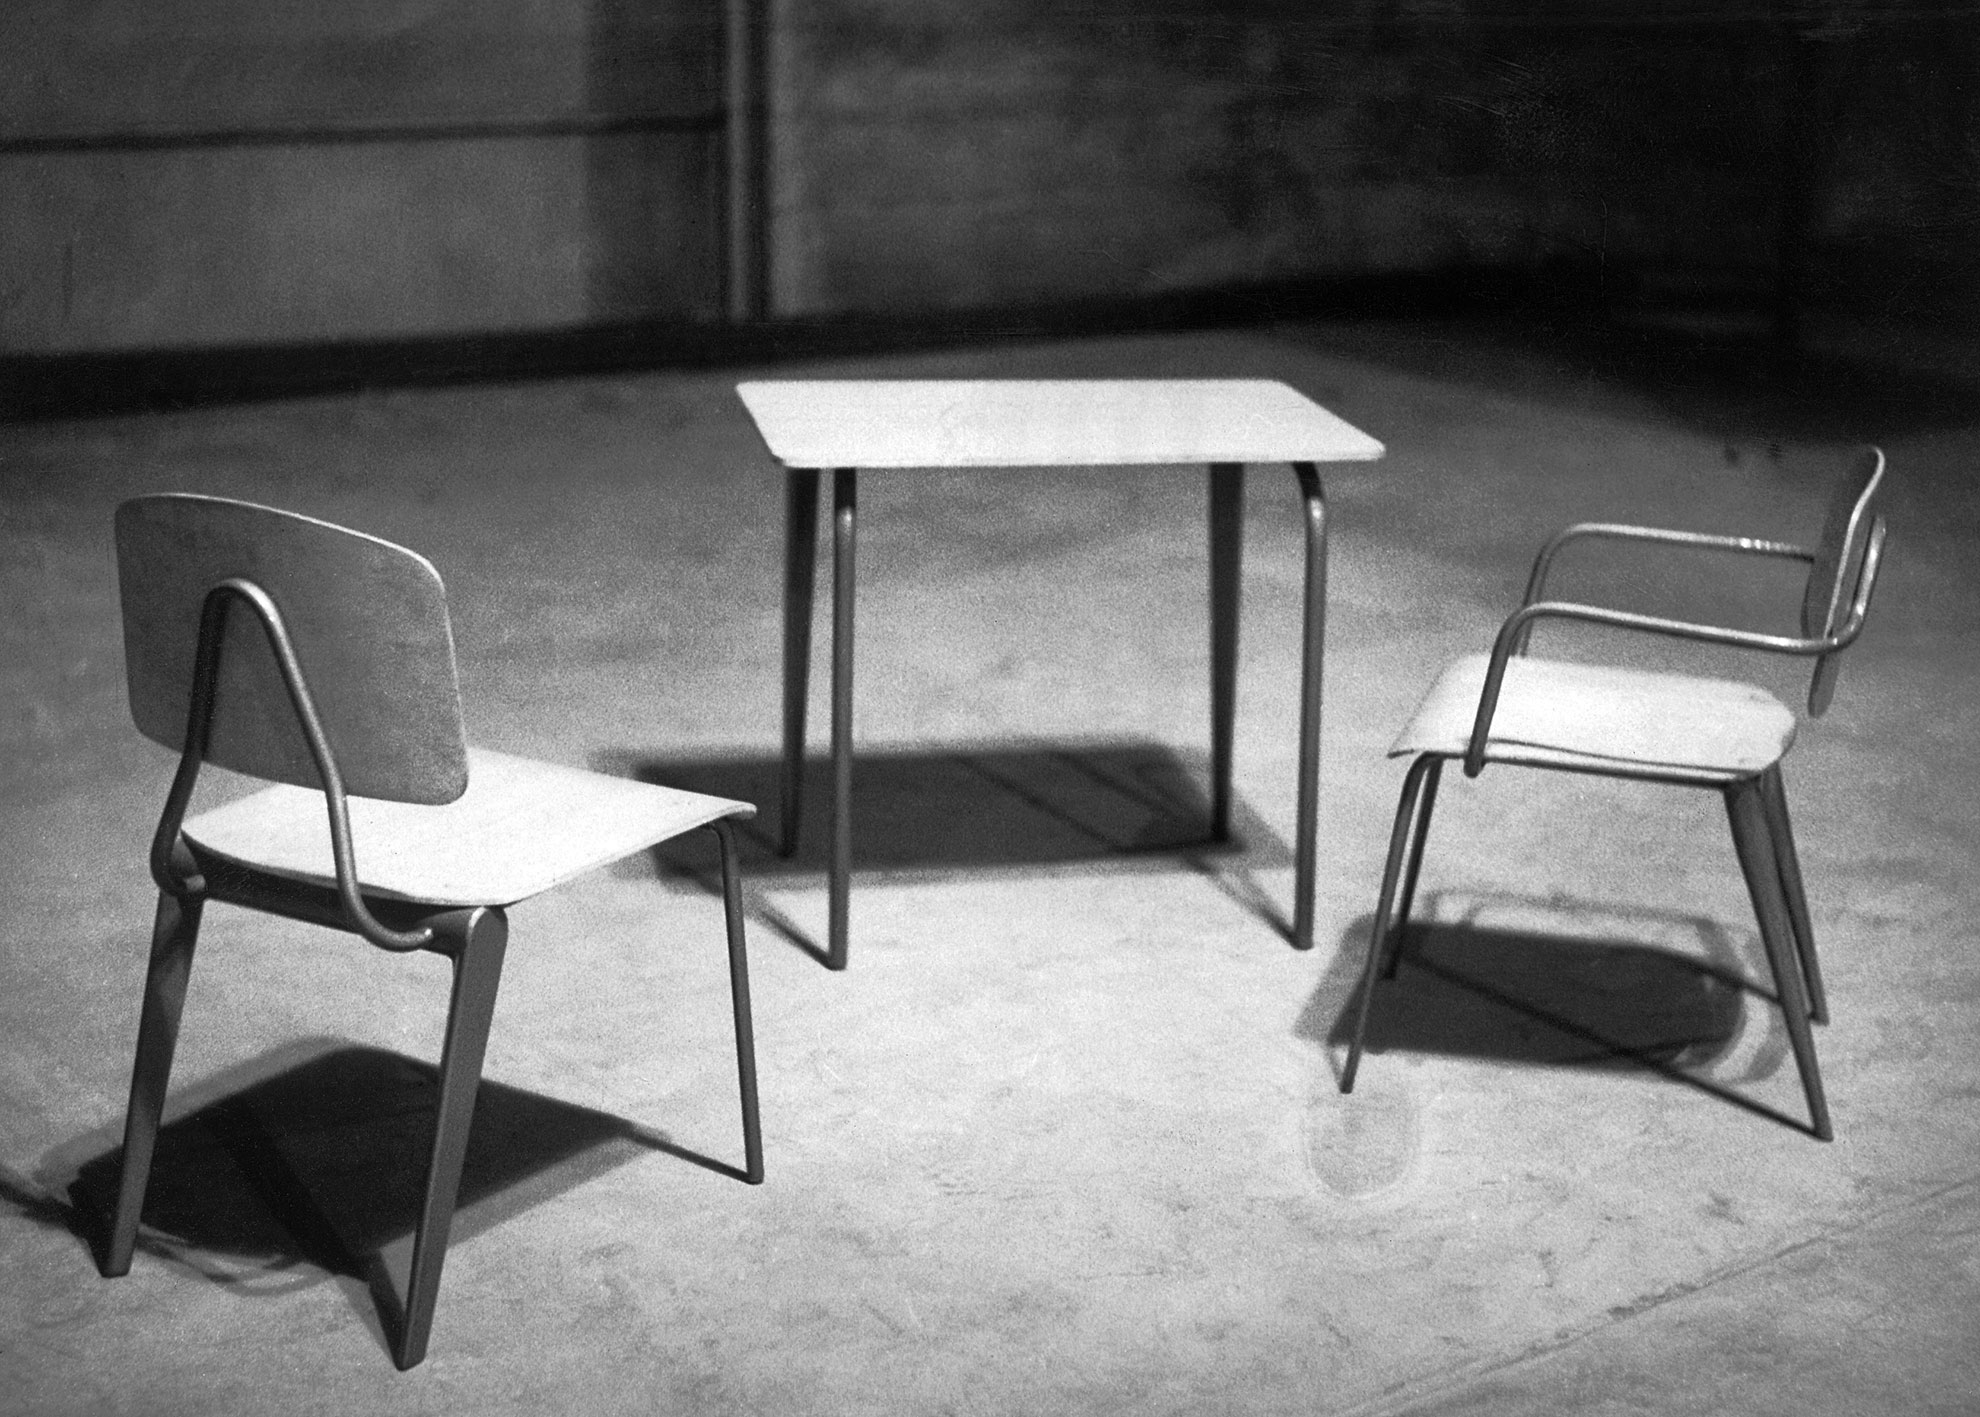 Ensemble Maternelle, 1951: table no. 804, chair no. 805 and variant with armrests. Aluminum prototypes. View in the workshop, ca. 1953.